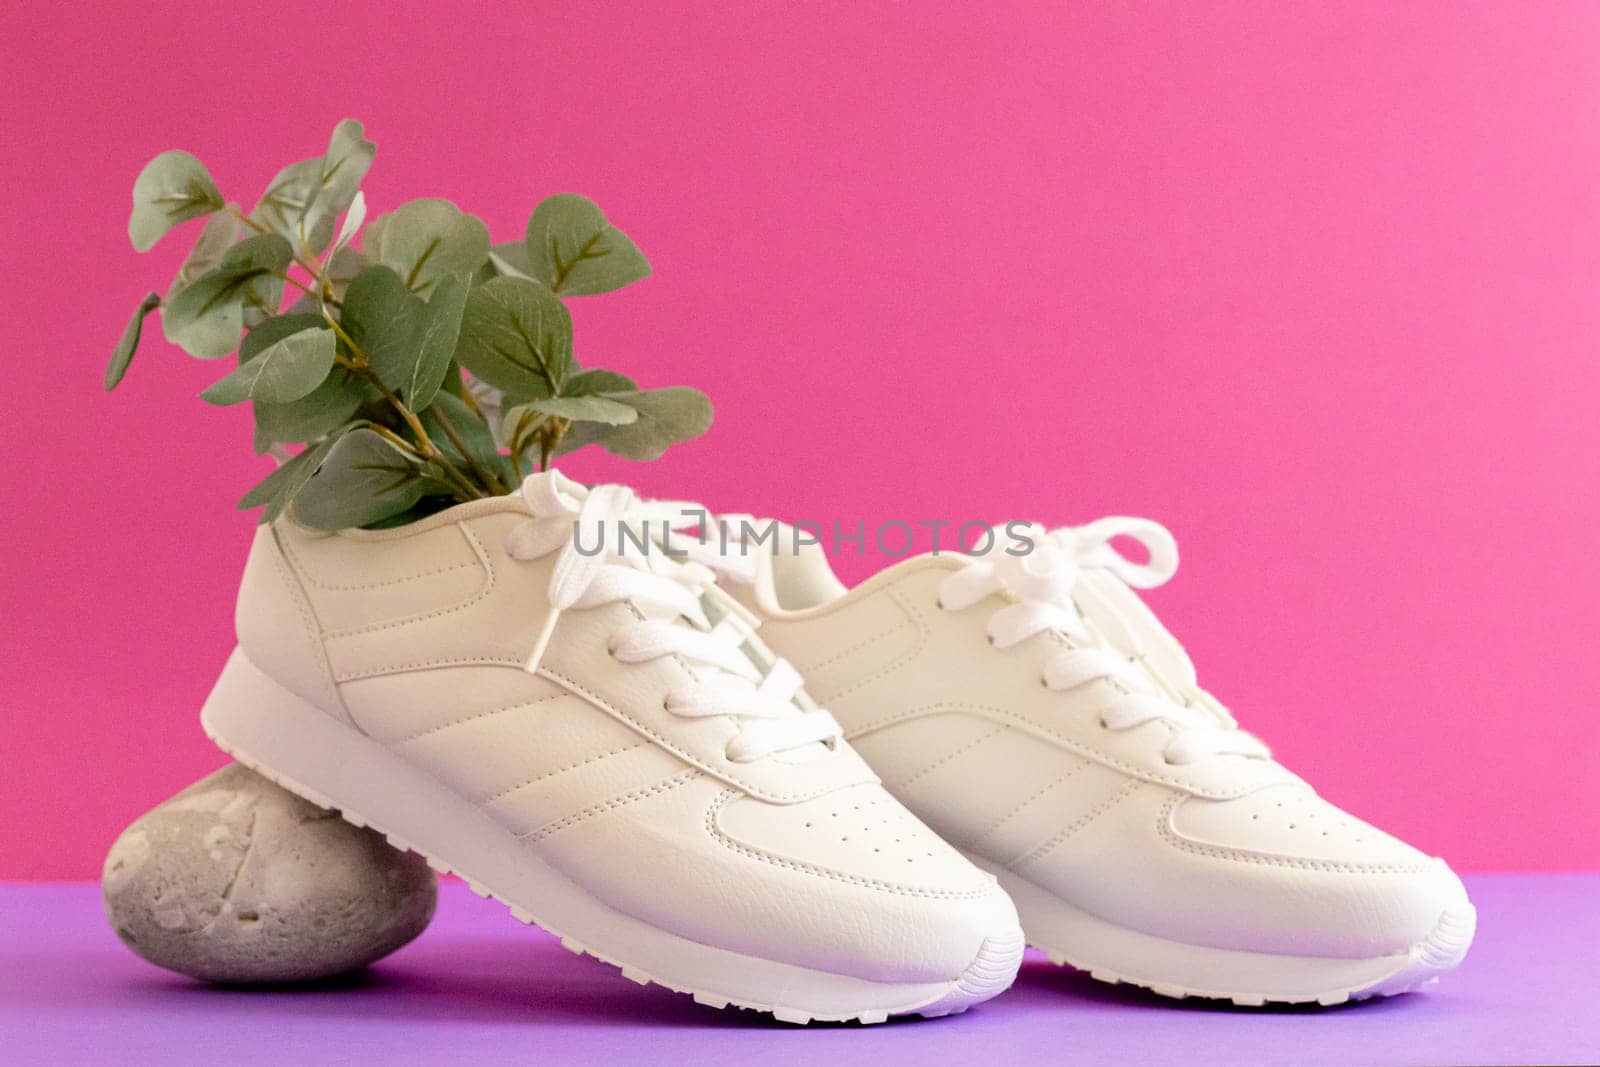 One pair of modern fashionable white sneakers from a eucalyptus branch rests on a gray stone on a lilac-pink background, close-up side view. Fashionable shoes concept.